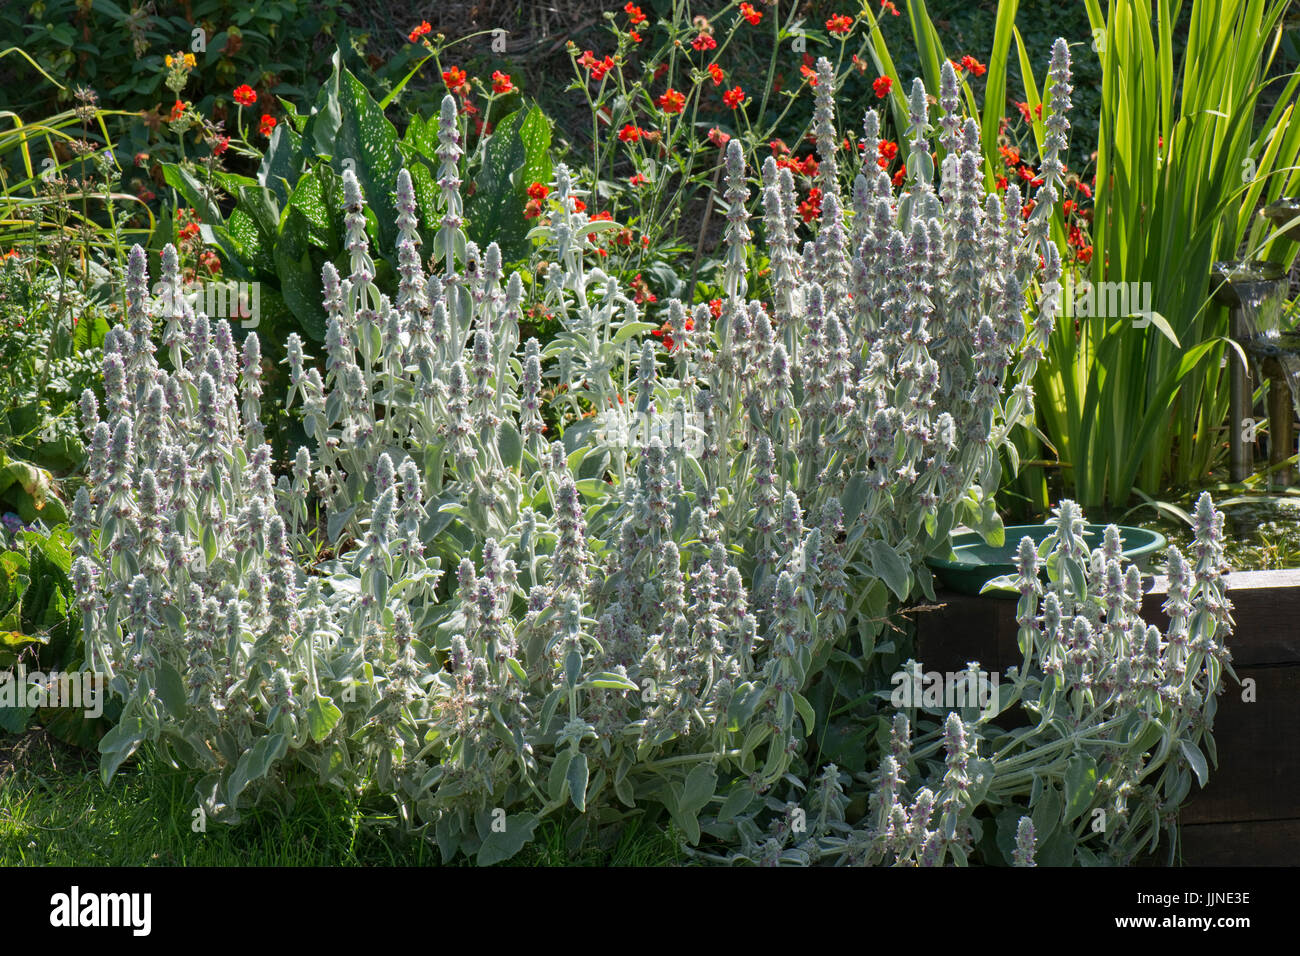 Lamb's-ear or wooly hedgenettle, Stachys byzantina, a highly insect attracting ornamental garden plant in flower, Berkshire, July Stock Photo